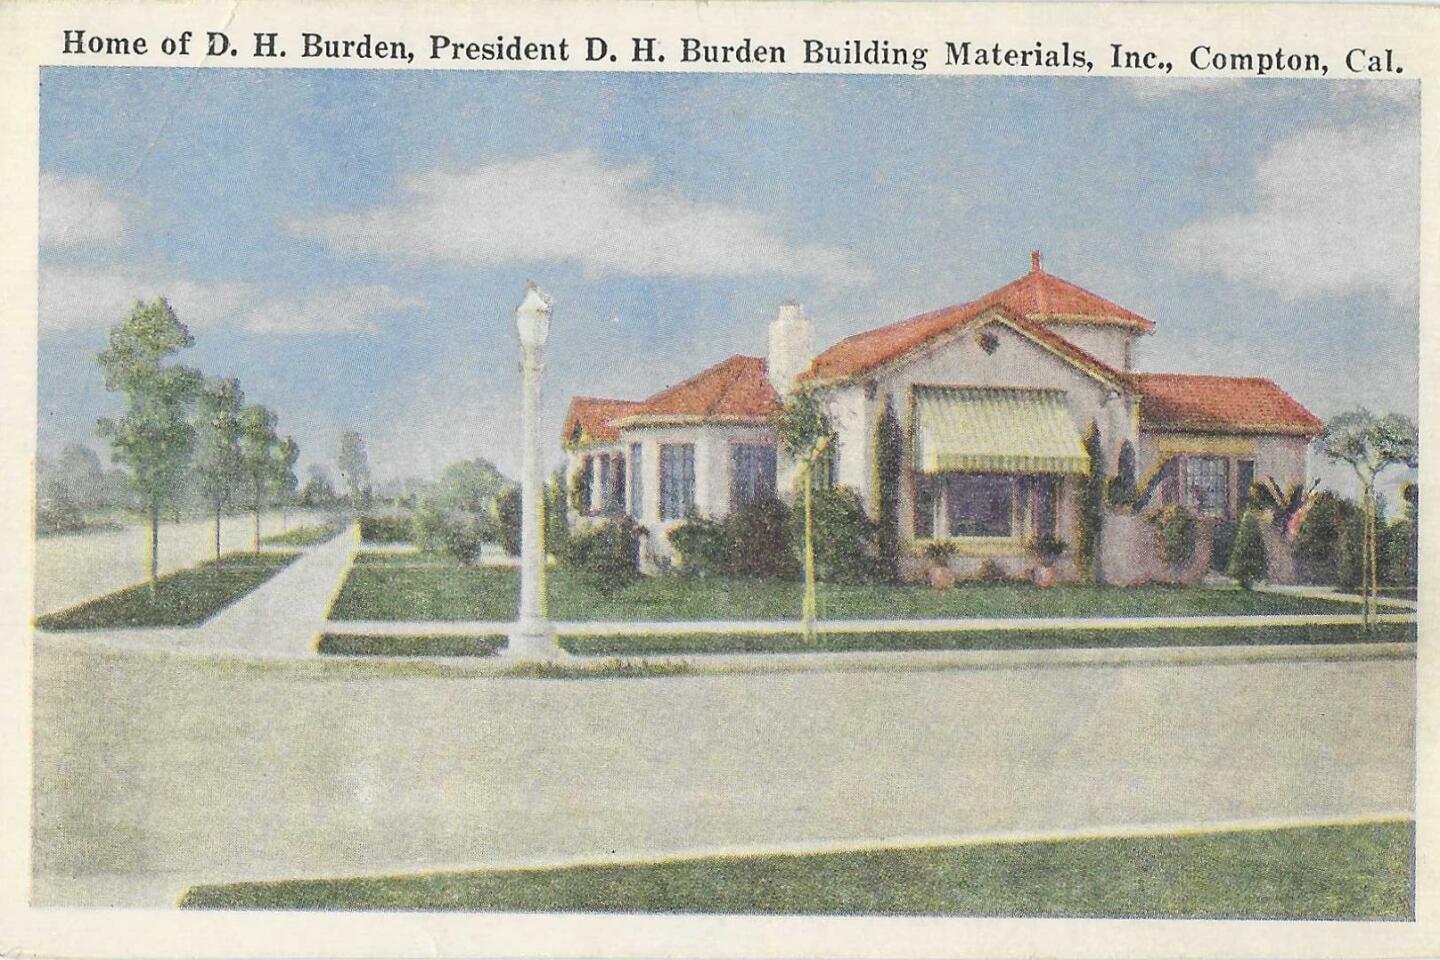 A postcard shows a Compton home with red-tiled roof and an awning over the front window.